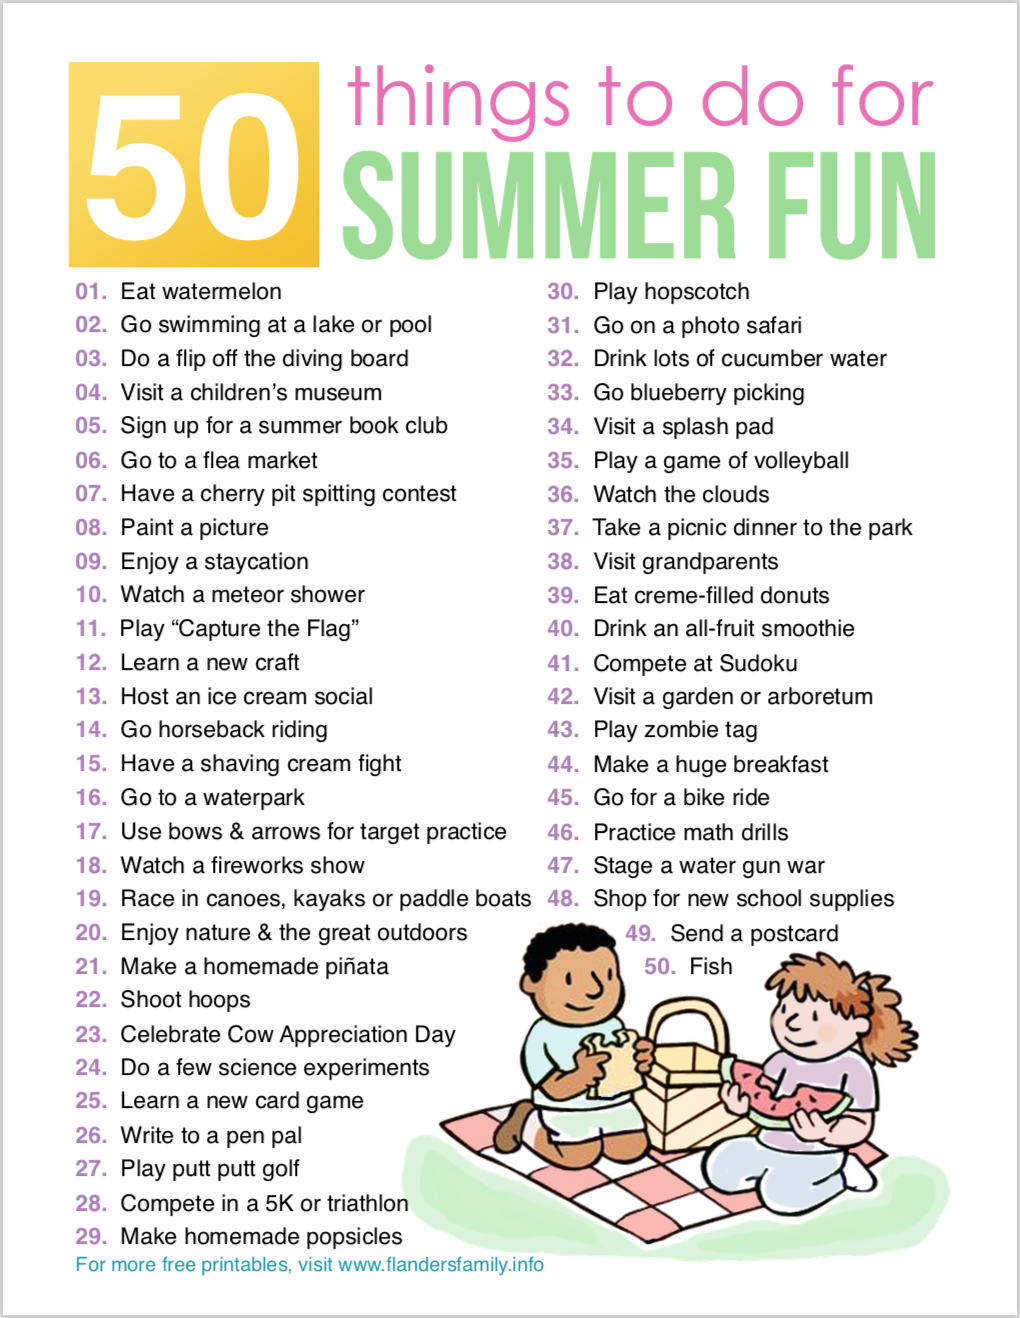 50-things-to-do-for-summer-fun-flanders-family-homelife